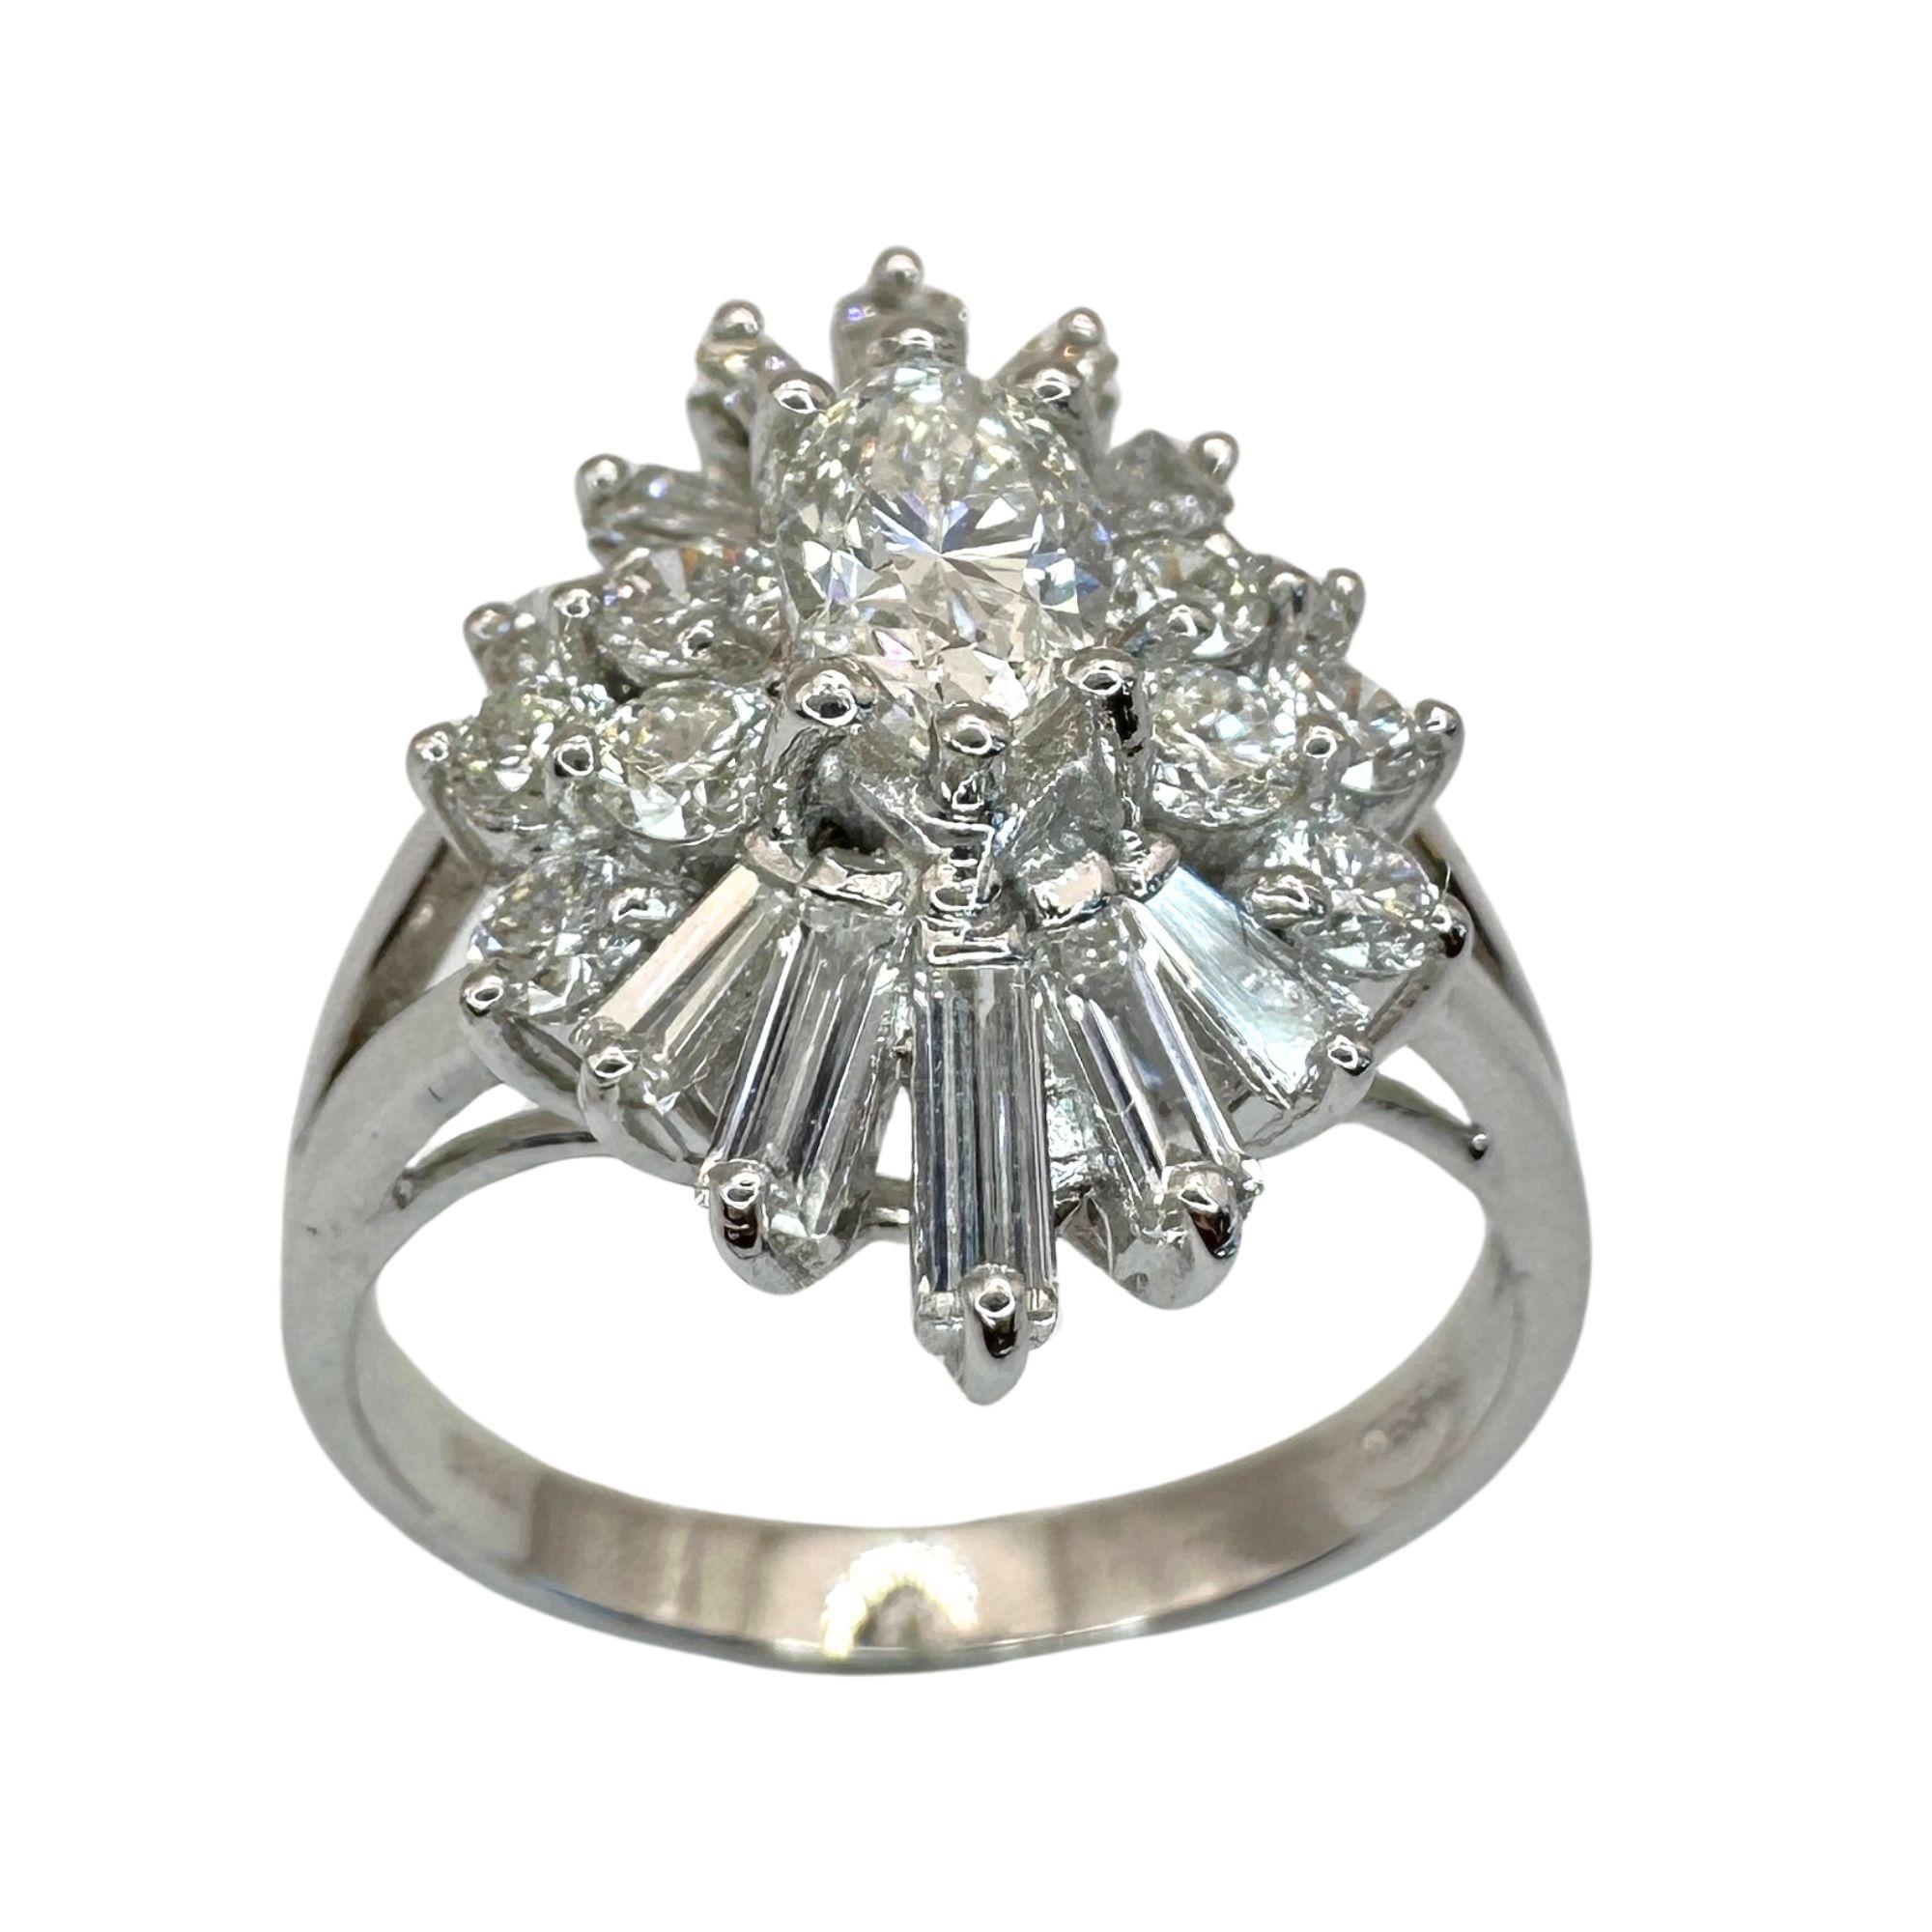 Crafted from luxurious 18k white gold, this stunning ring boasts a 6.25 size. Adorned with a sparkling 0.48 carat Marquise Cut diamond center and 0.95 carats of diamond accents, this piece is a true beauty. Weighing in at 4.79 grams, this ring is